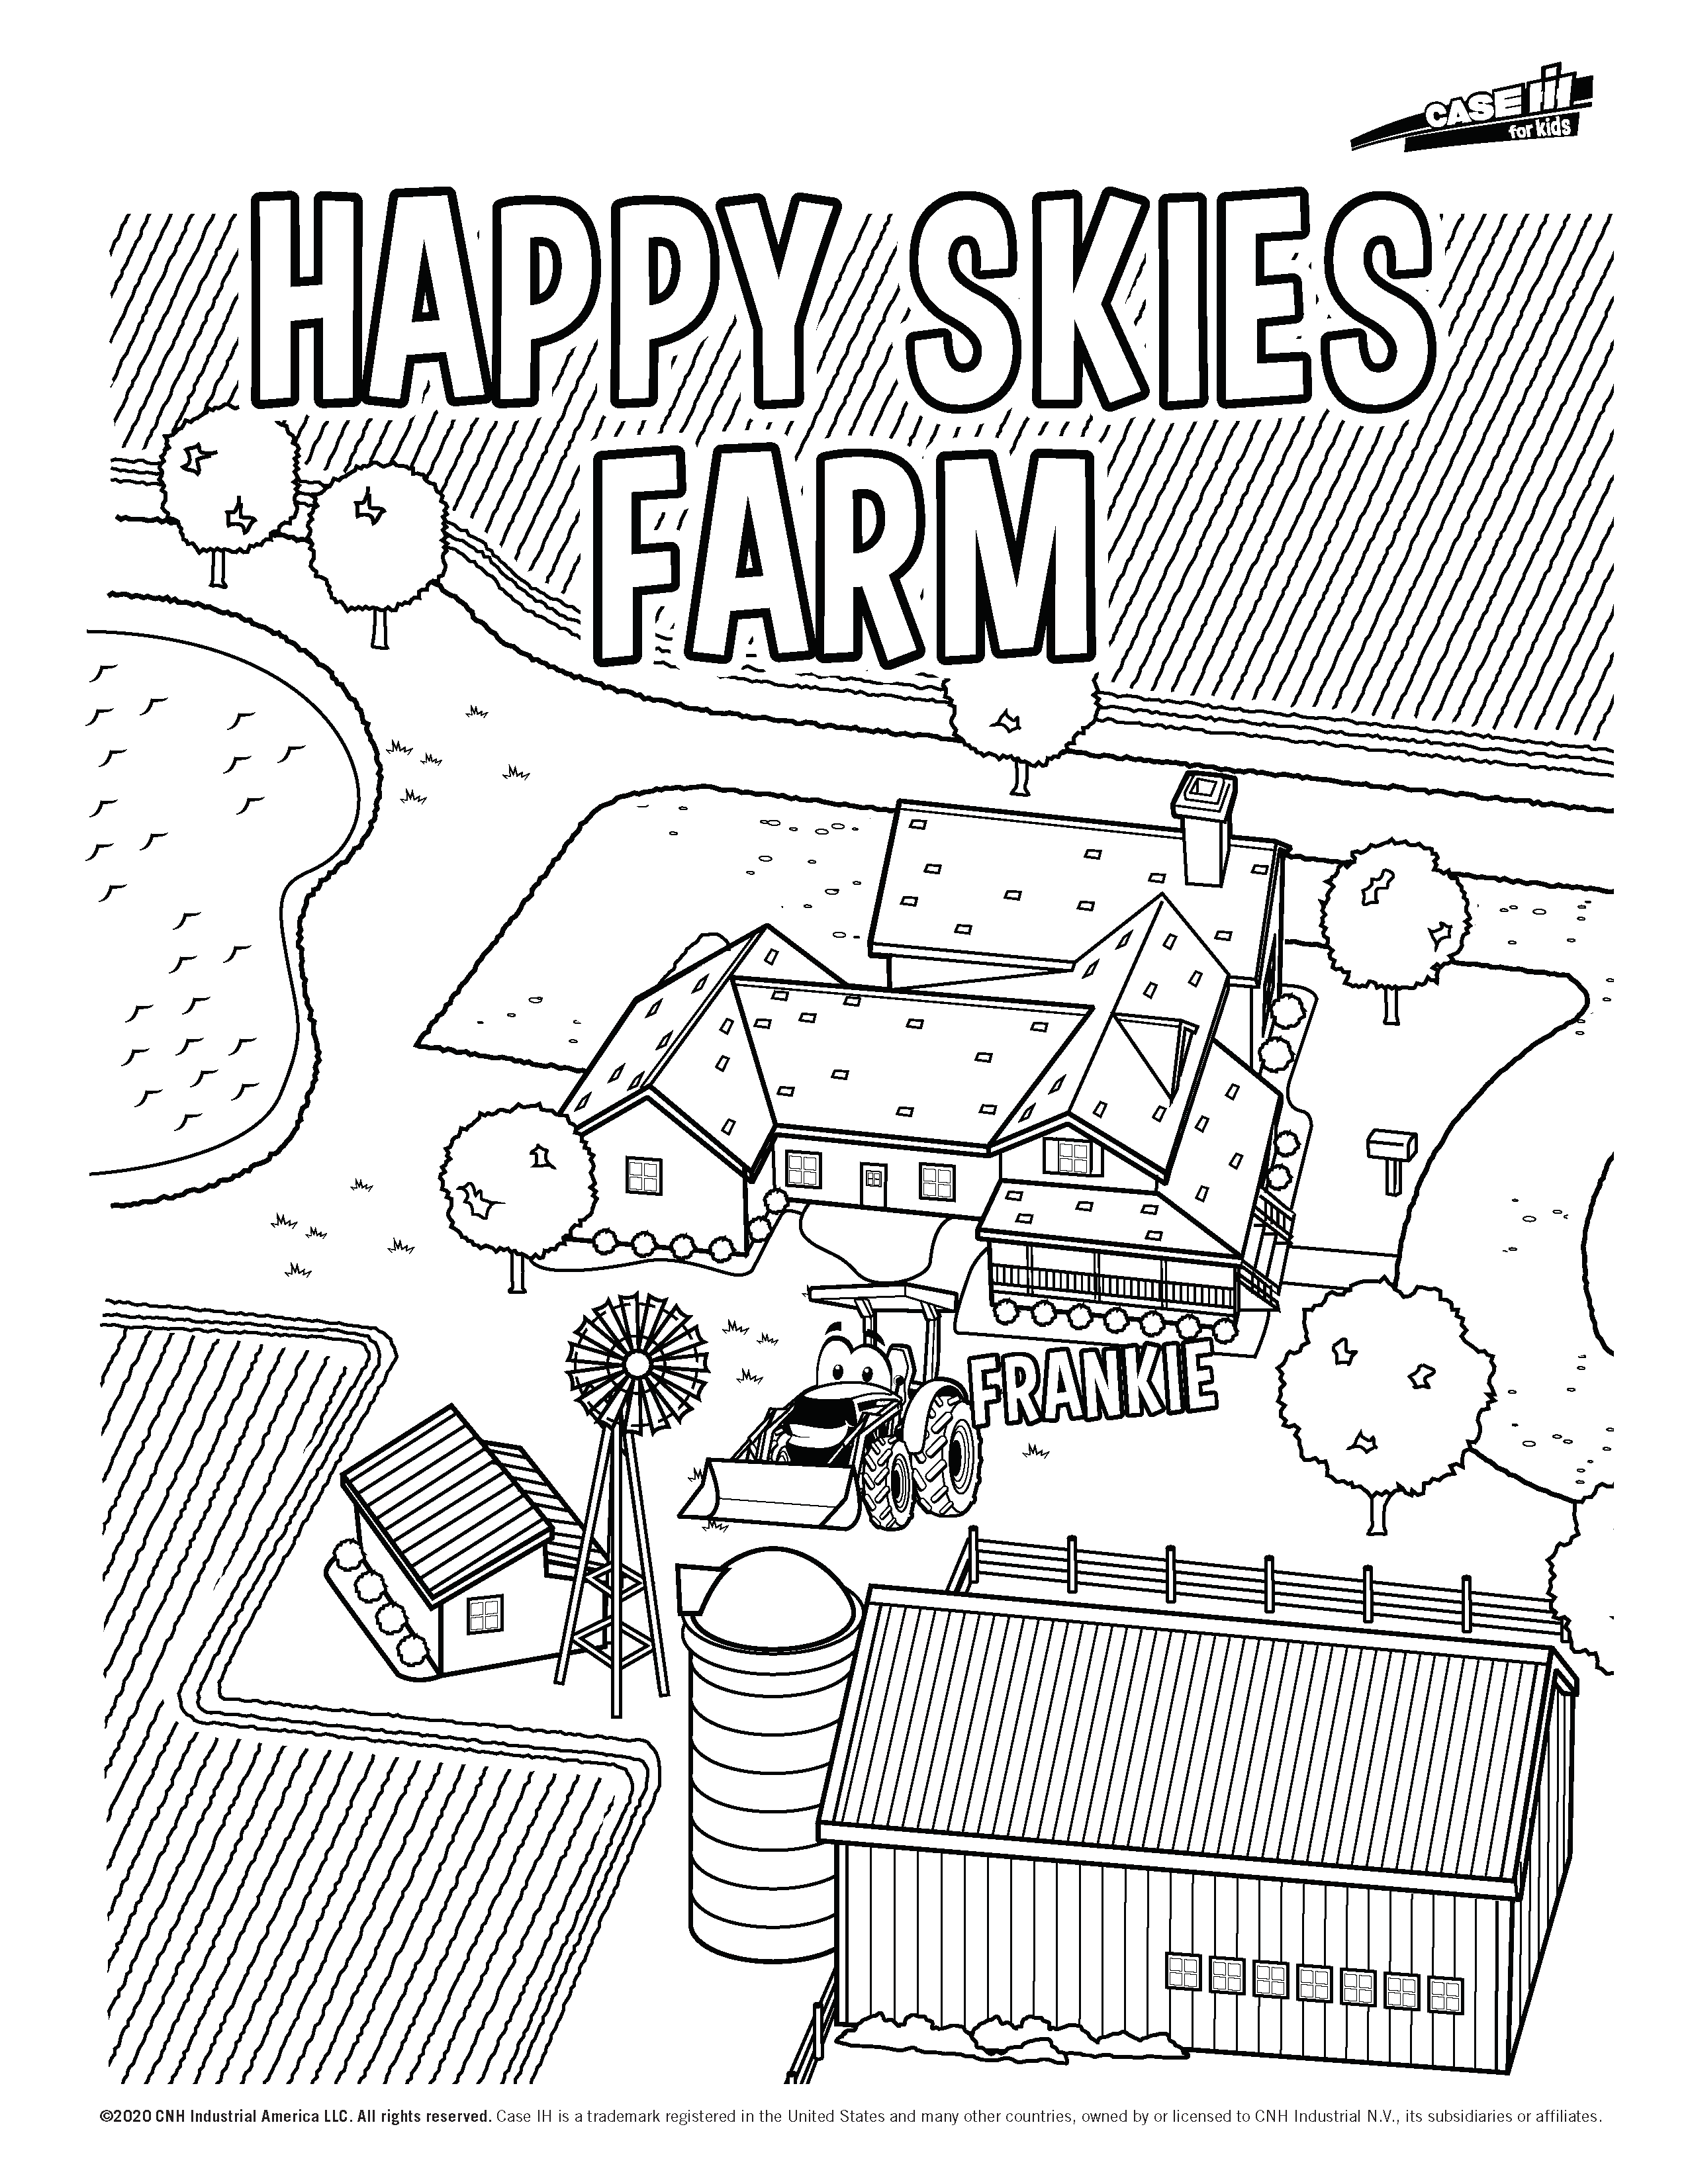 Casey and Friends_Happy Skies Farm_02.png